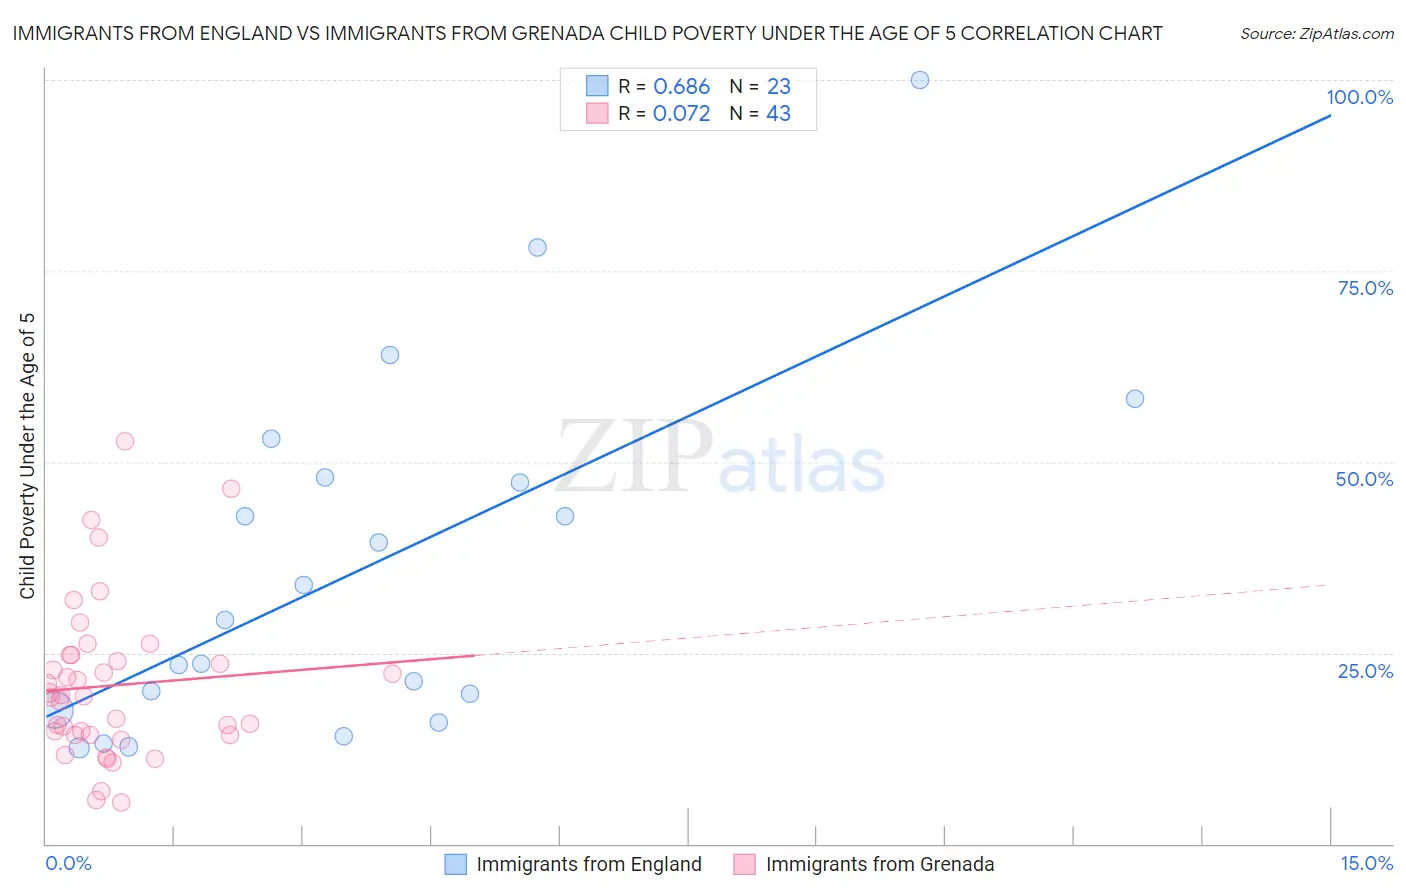 Immigrants from England vs Immigrants from Grenada Child Poverty Under the Age of 5